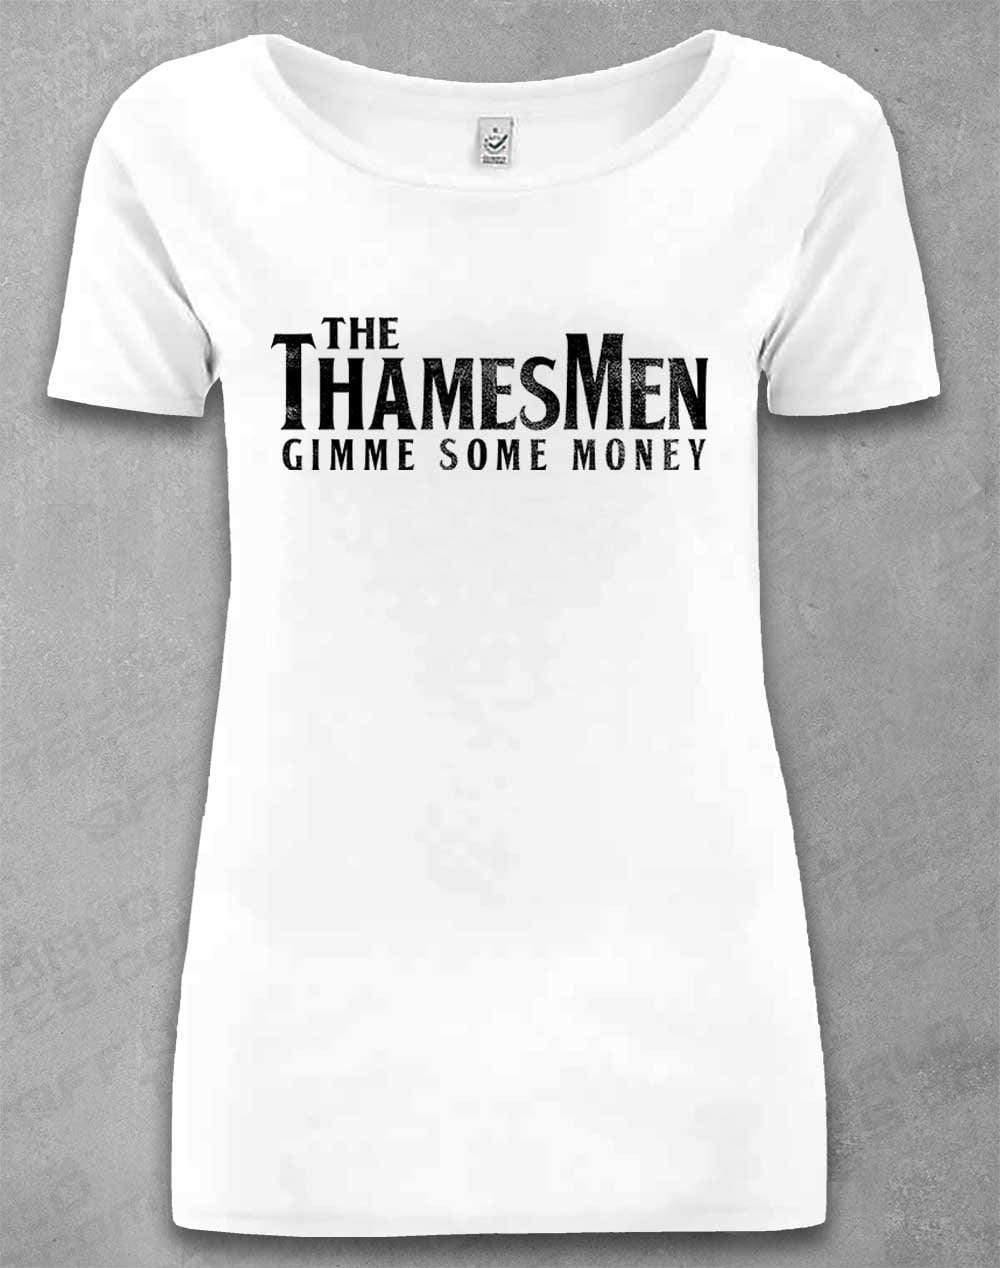 DELUXE The Thamesmen Gimme Some Money Organic Scoop Neck T-Shirt 8-10 / White  - Off World Tees